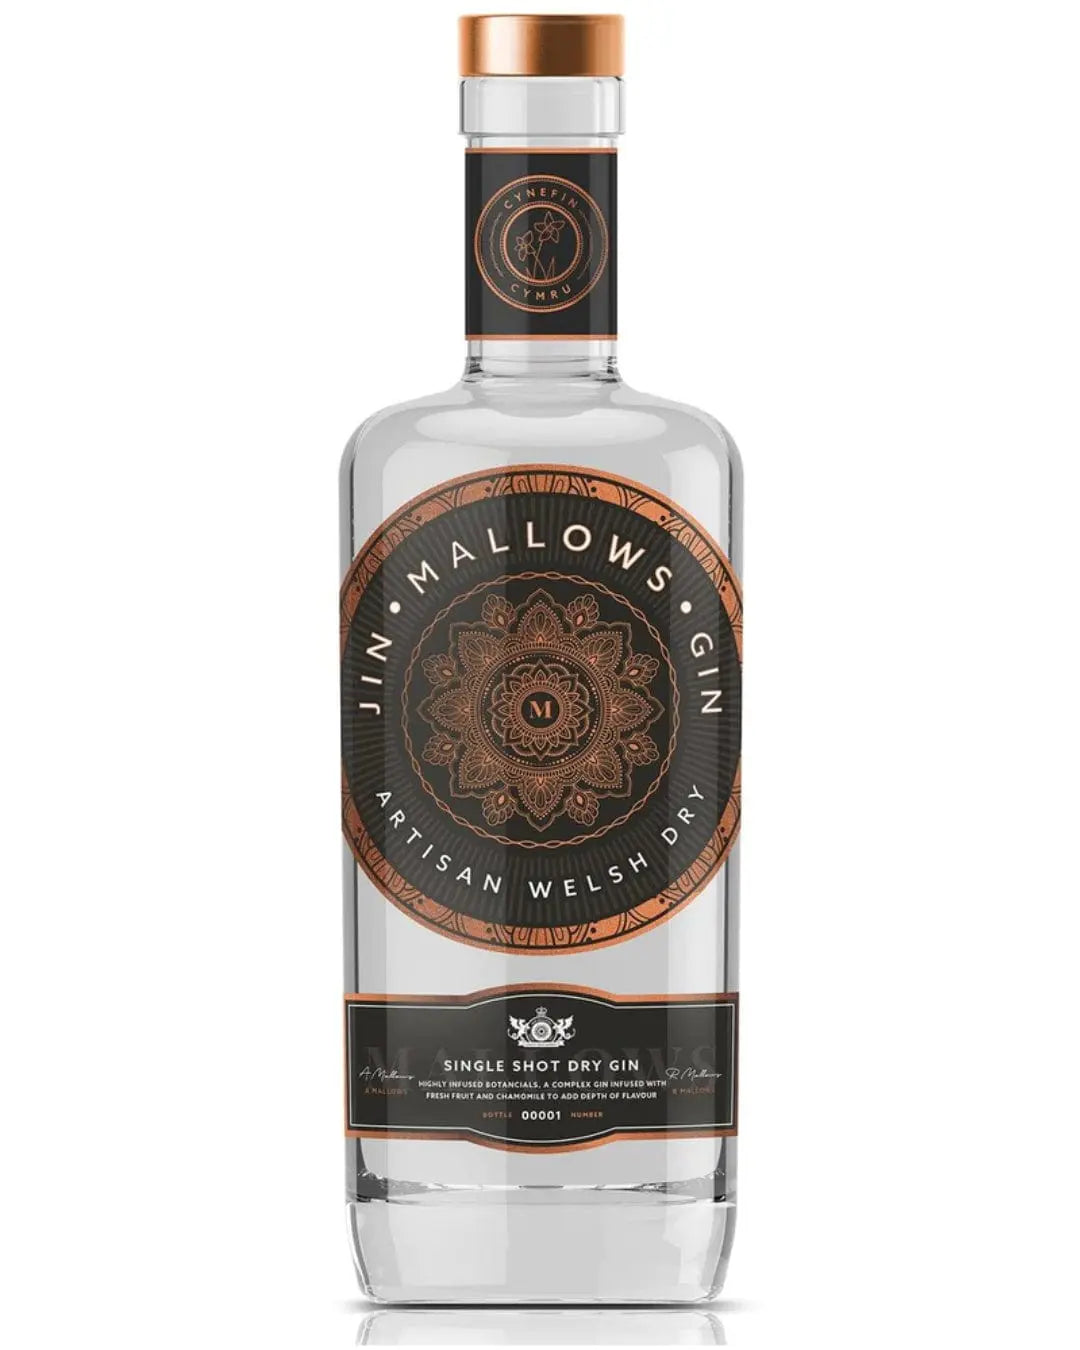 Mallows Welsh Dry Gin, 70 cl Gin